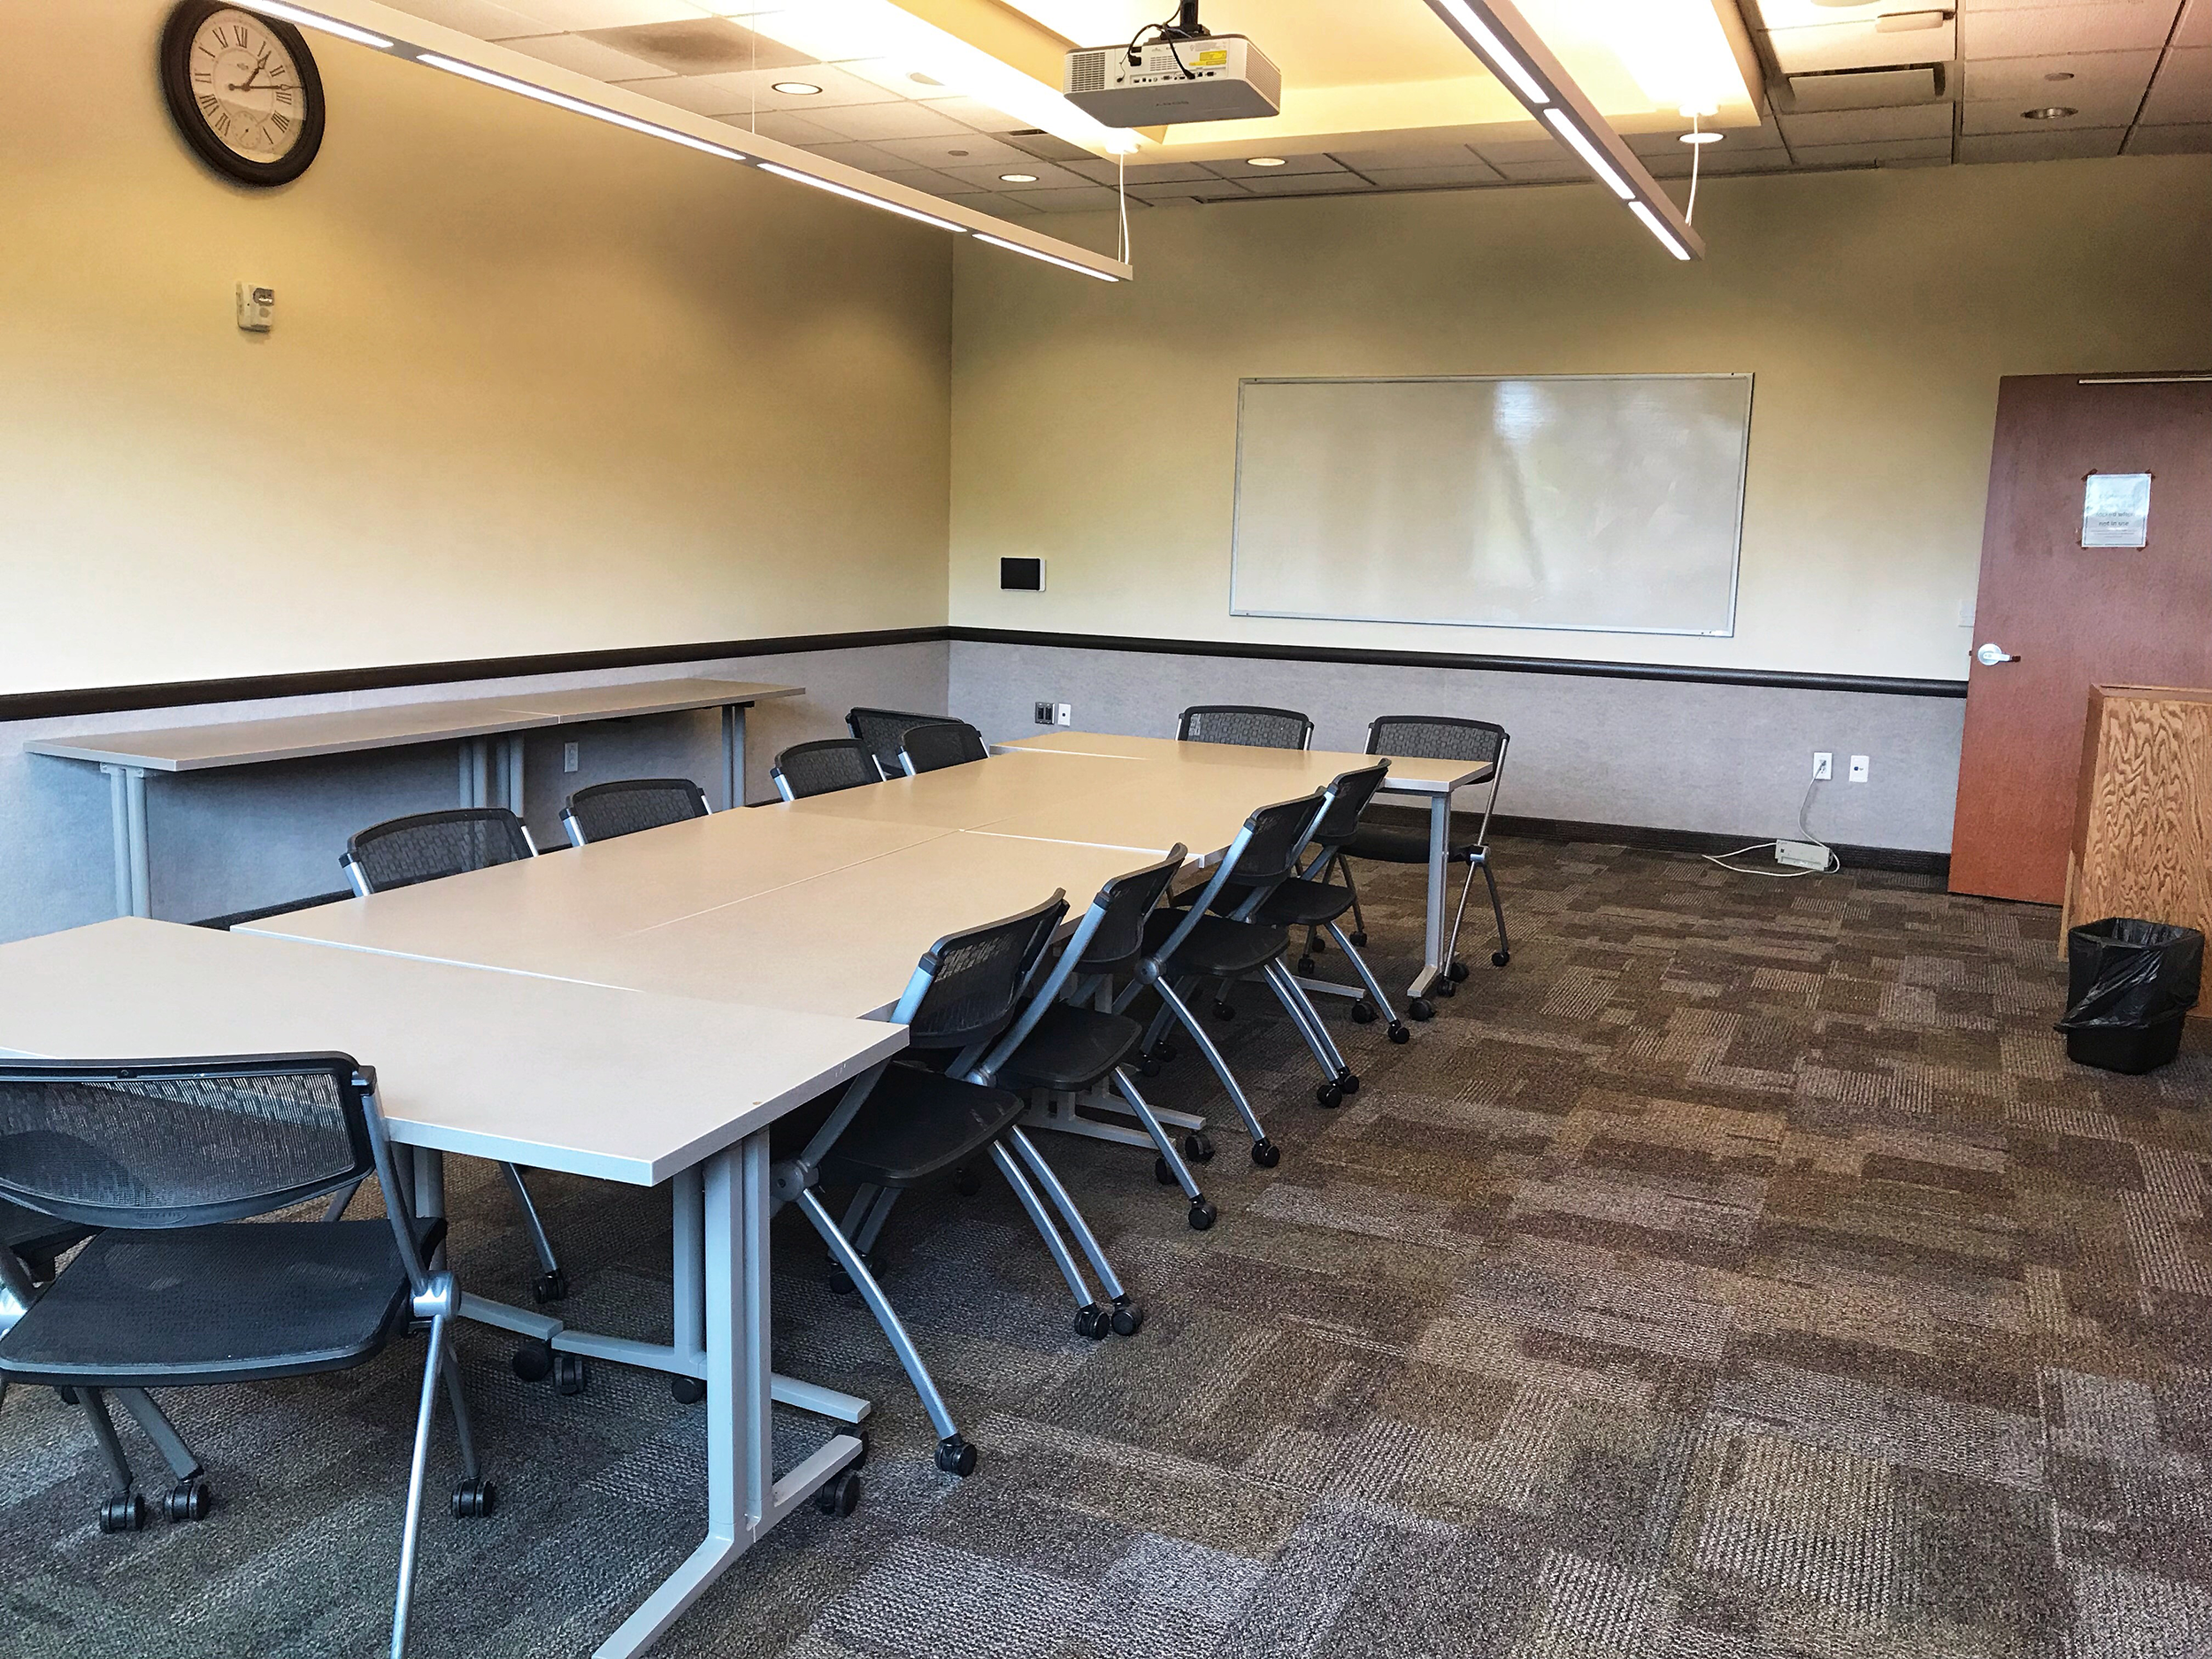 Upstairs Conference Room showing tables put together to resemble conference table, chairs, and white board mounted on wall